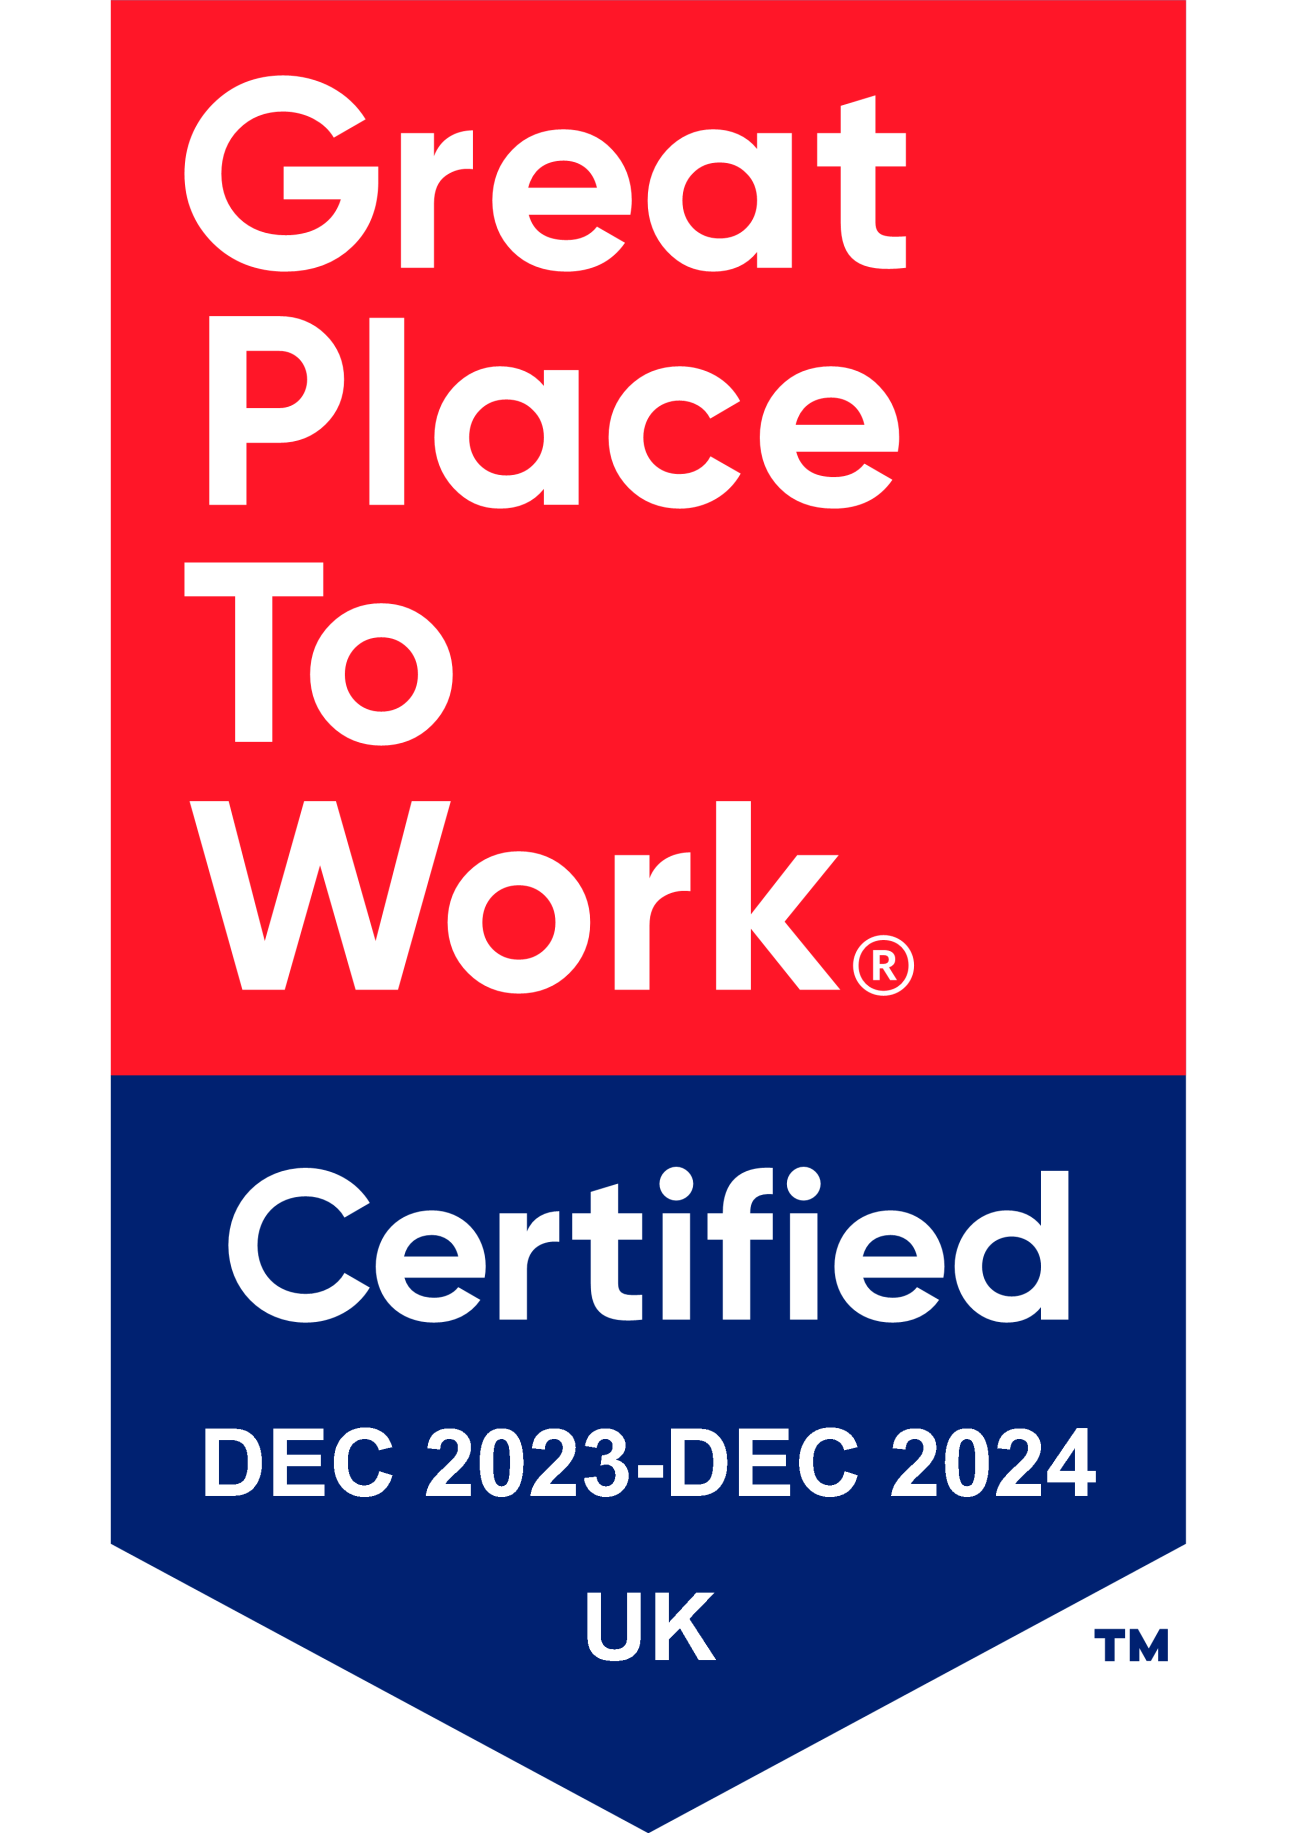 Great Place To Work Certified logo - 2023-4